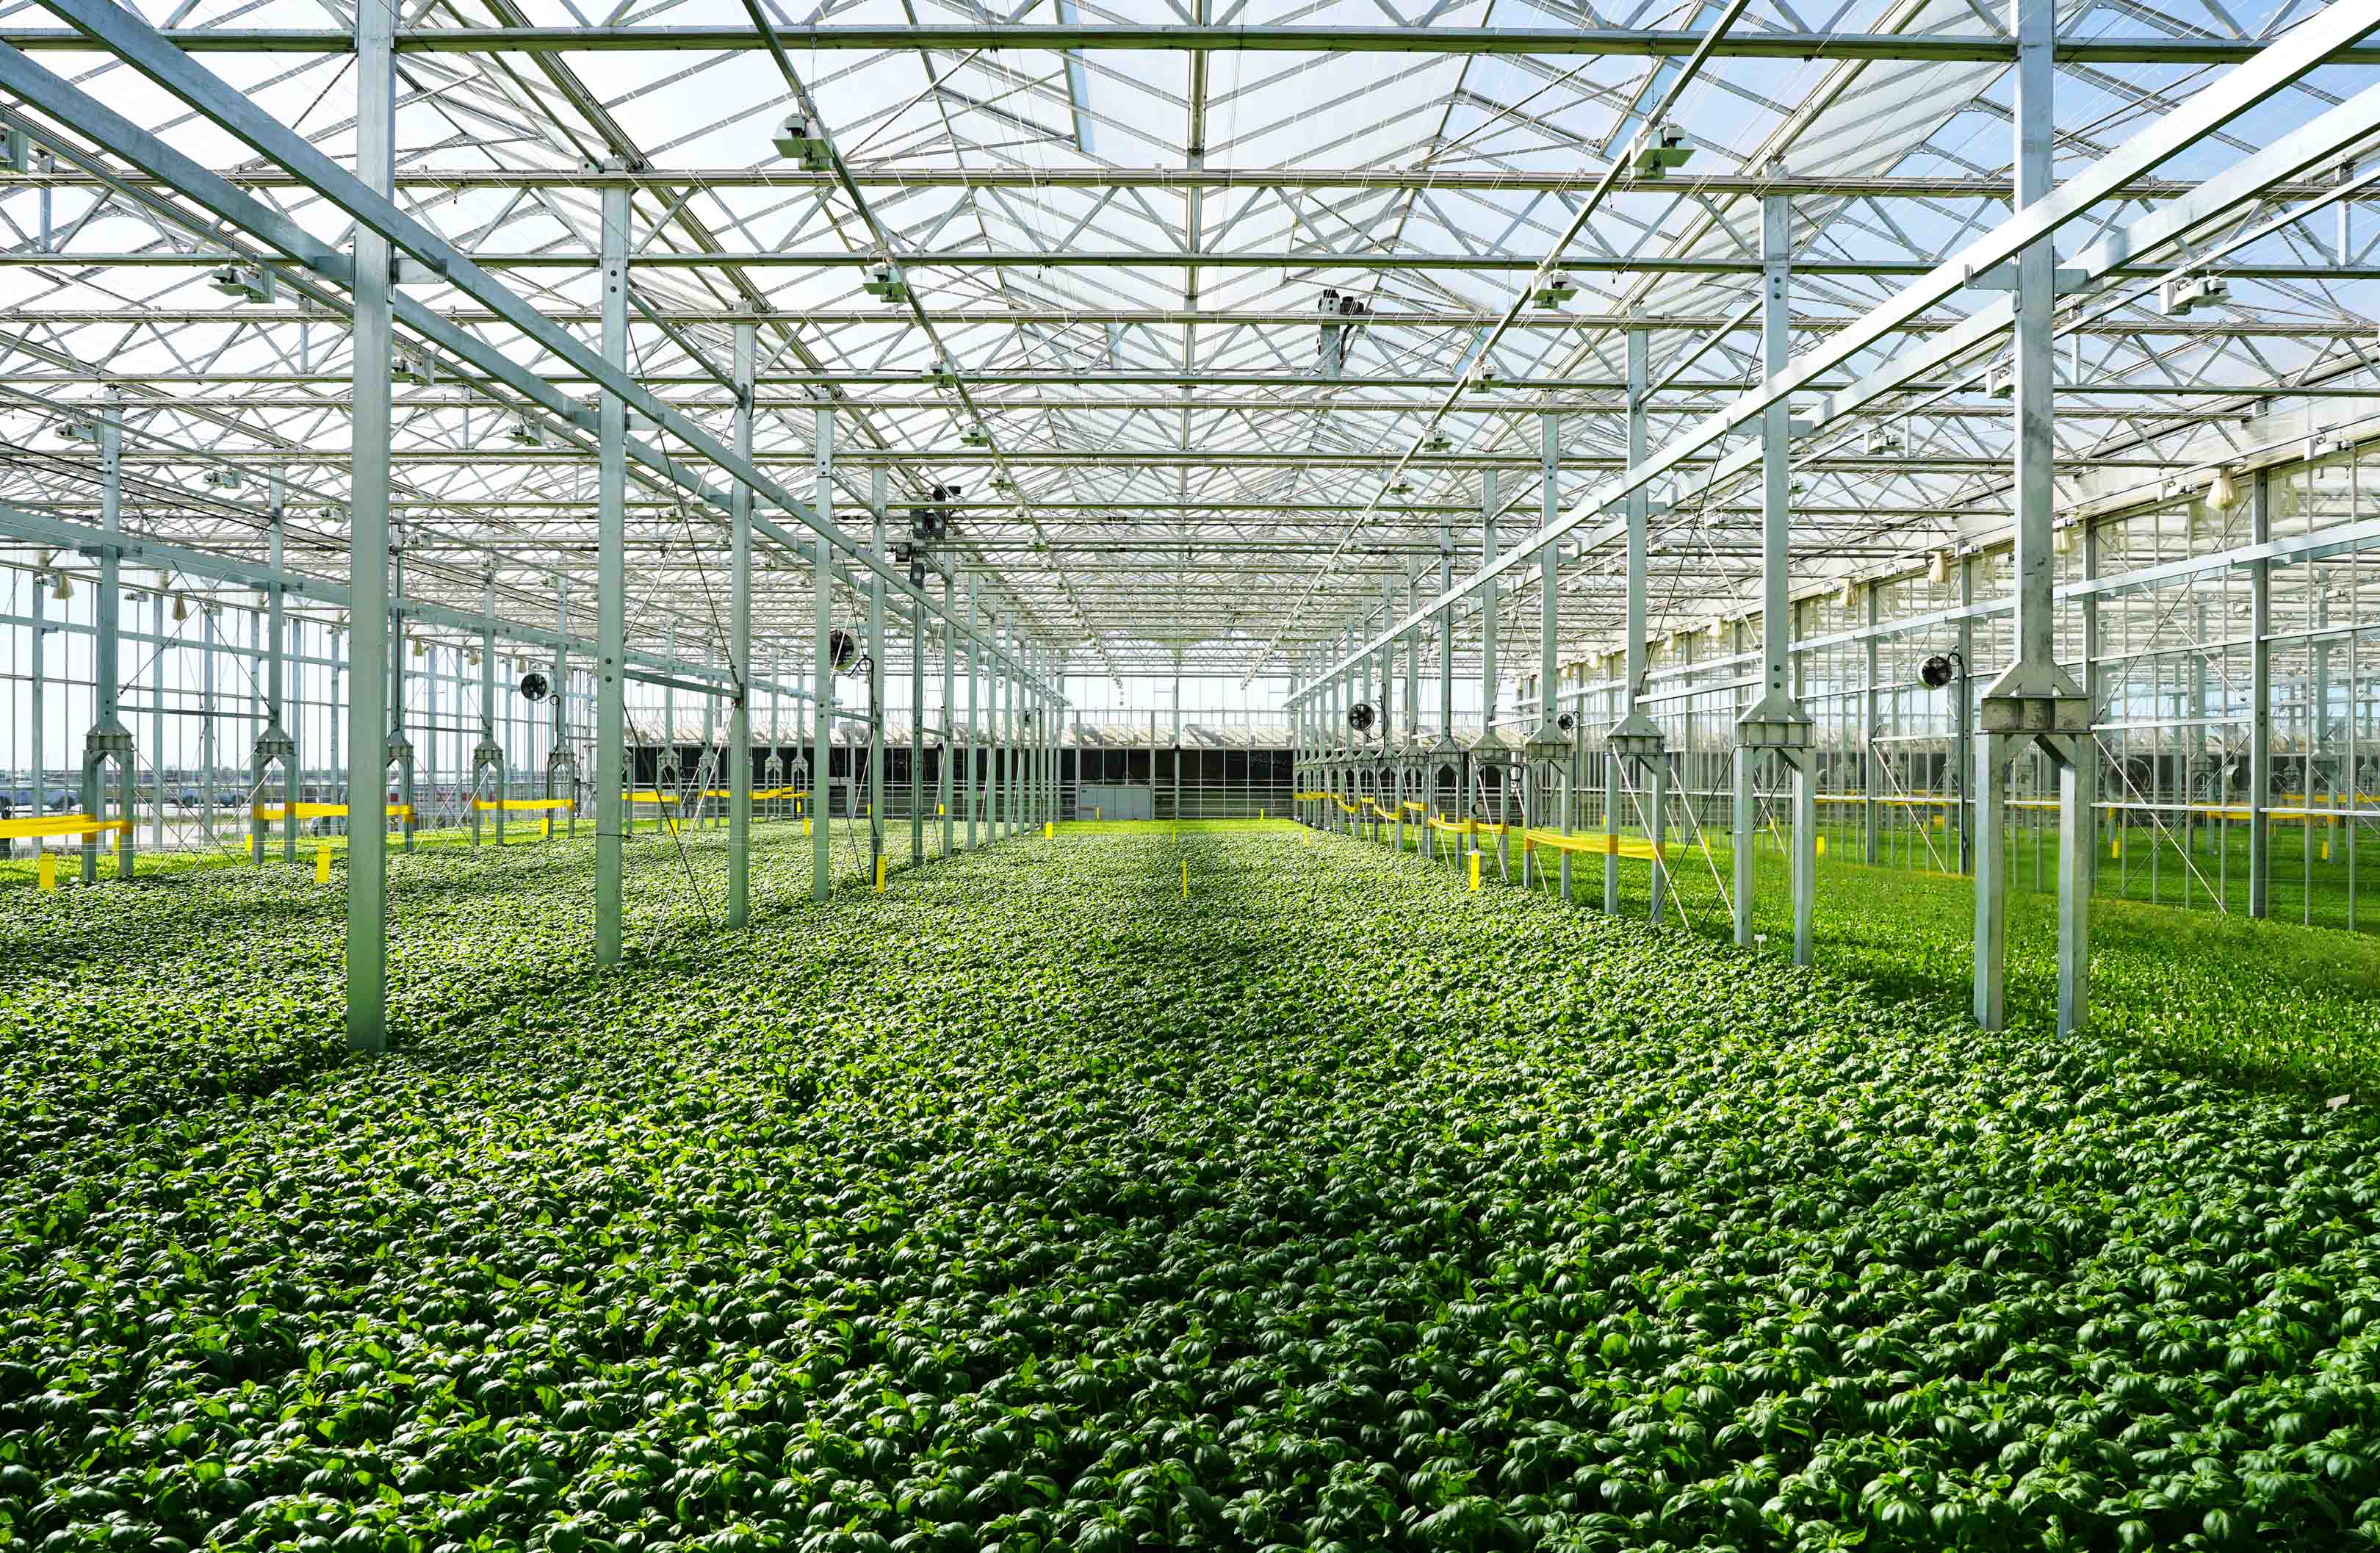 Gotham Greens Selects Windsor, Colorado for Expansion - Upstate